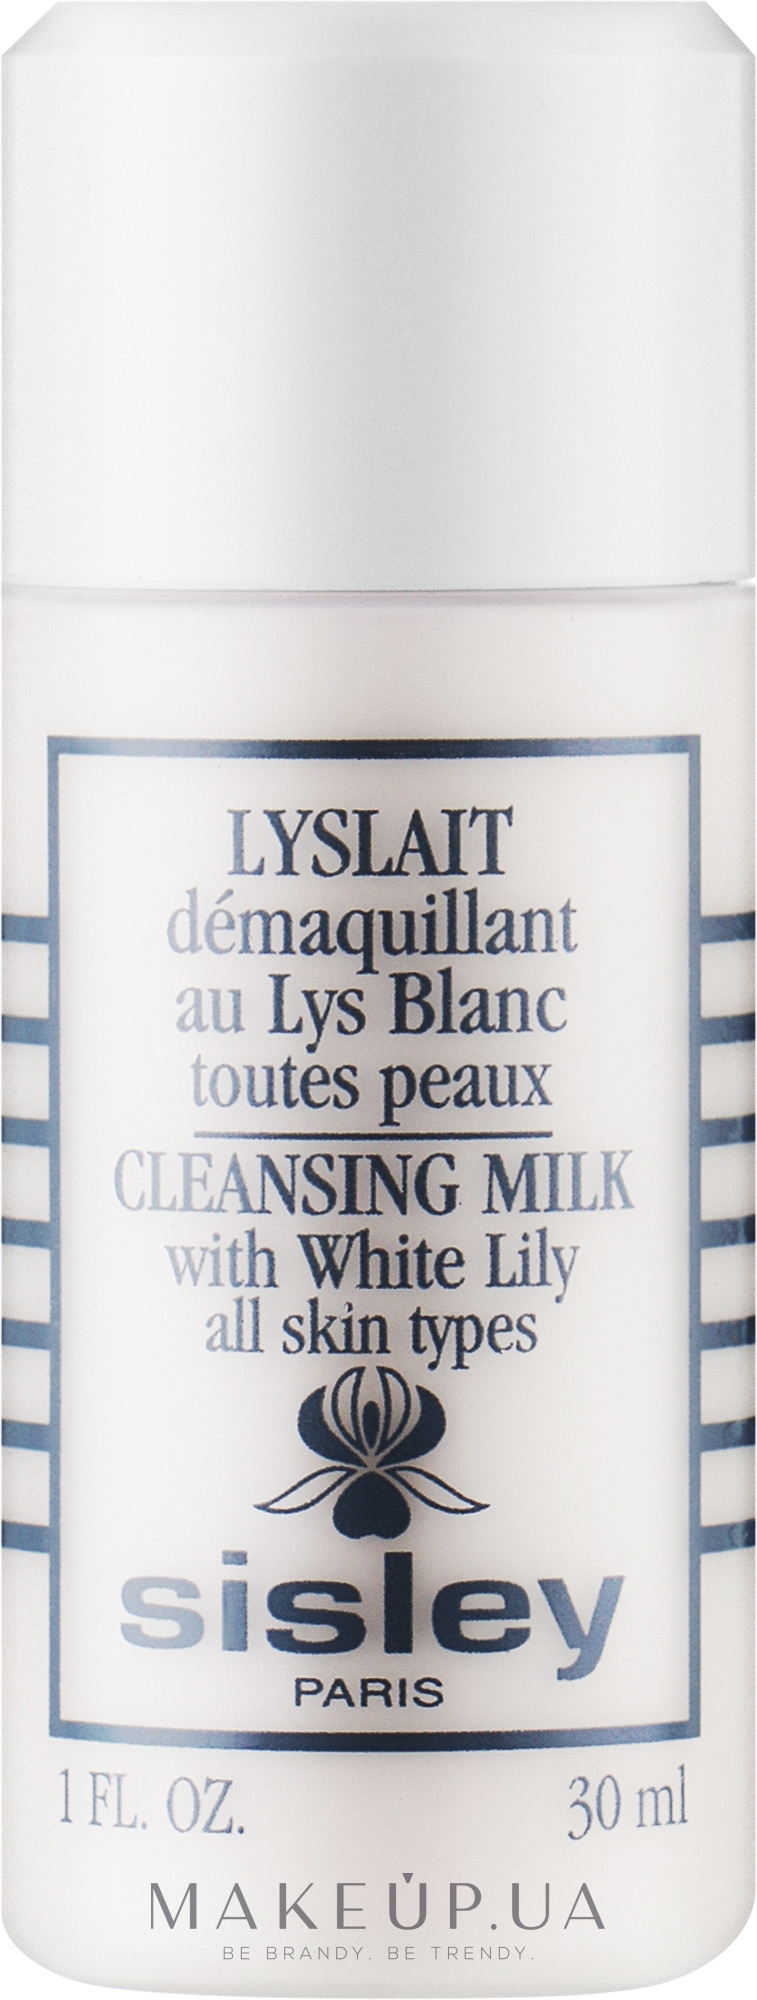 Sisley Lyslait Cleansing Milk with White Lily (тестер) - Sisley Lyslait Cleansing Milk with White Lily (тестер) — фото 30ml